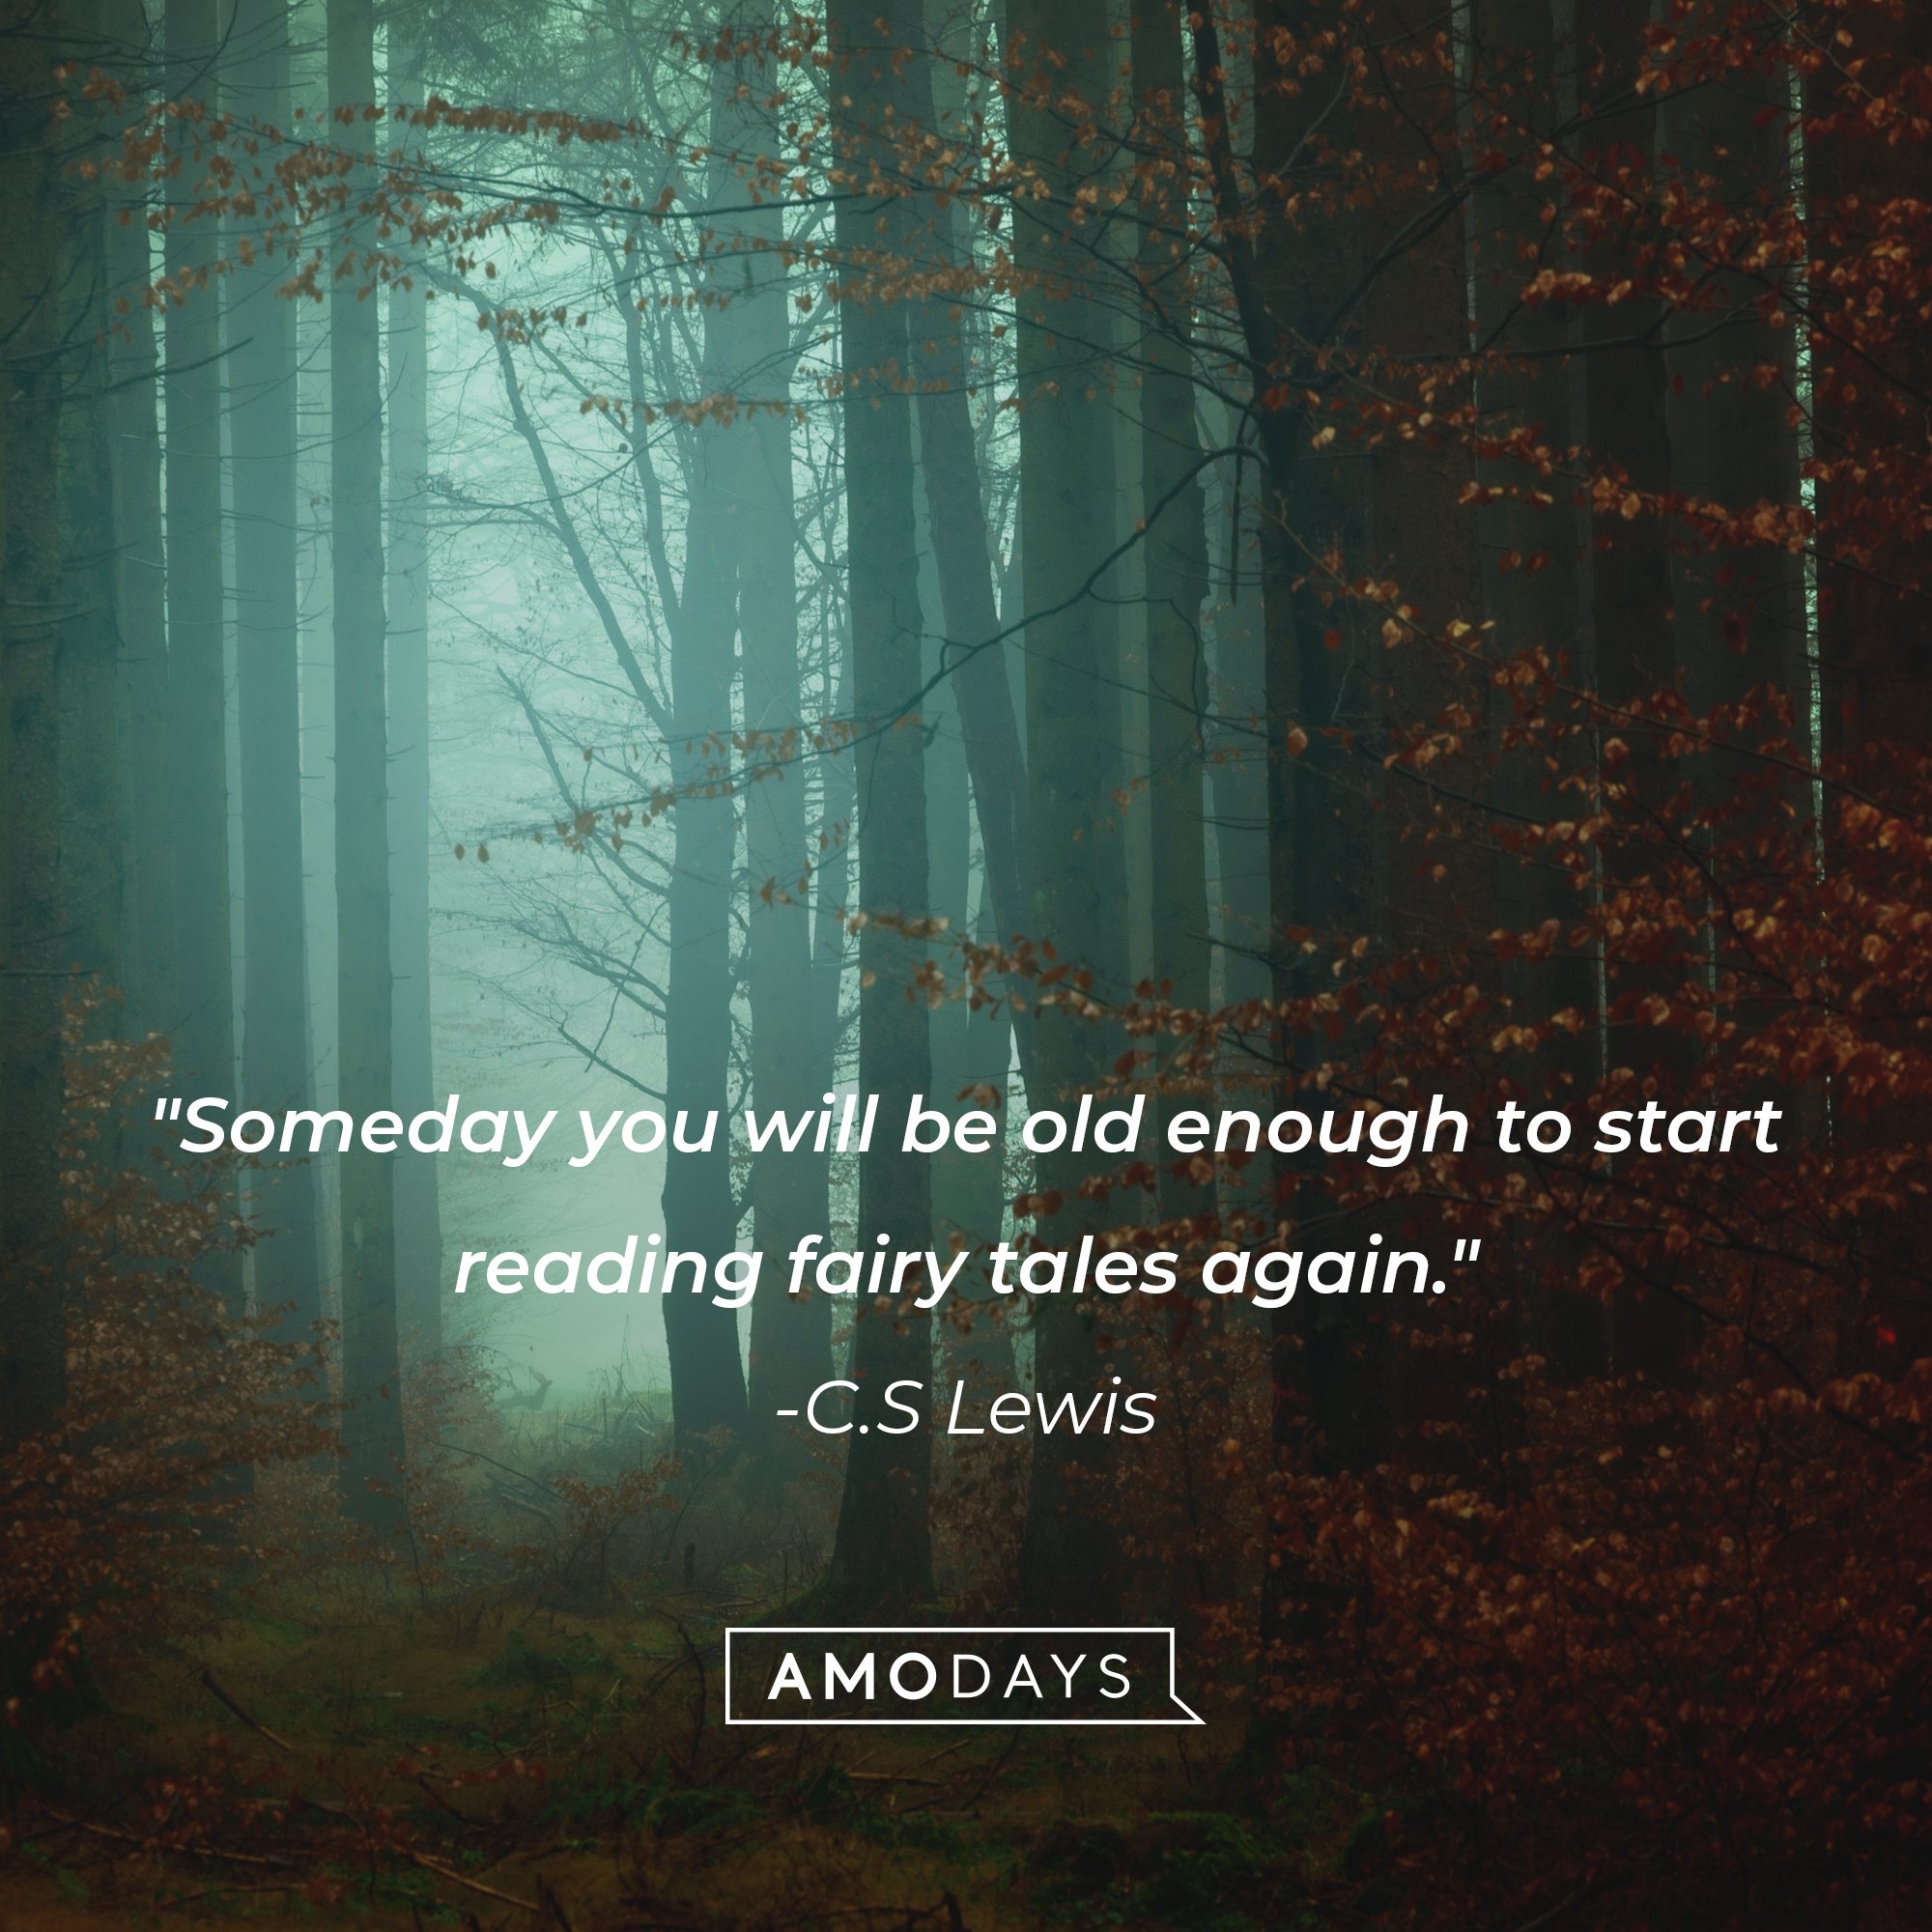 C.S. Lewis' quote: "Someday you will be old enough to start reading fairy tales again." | Image: Amo Days